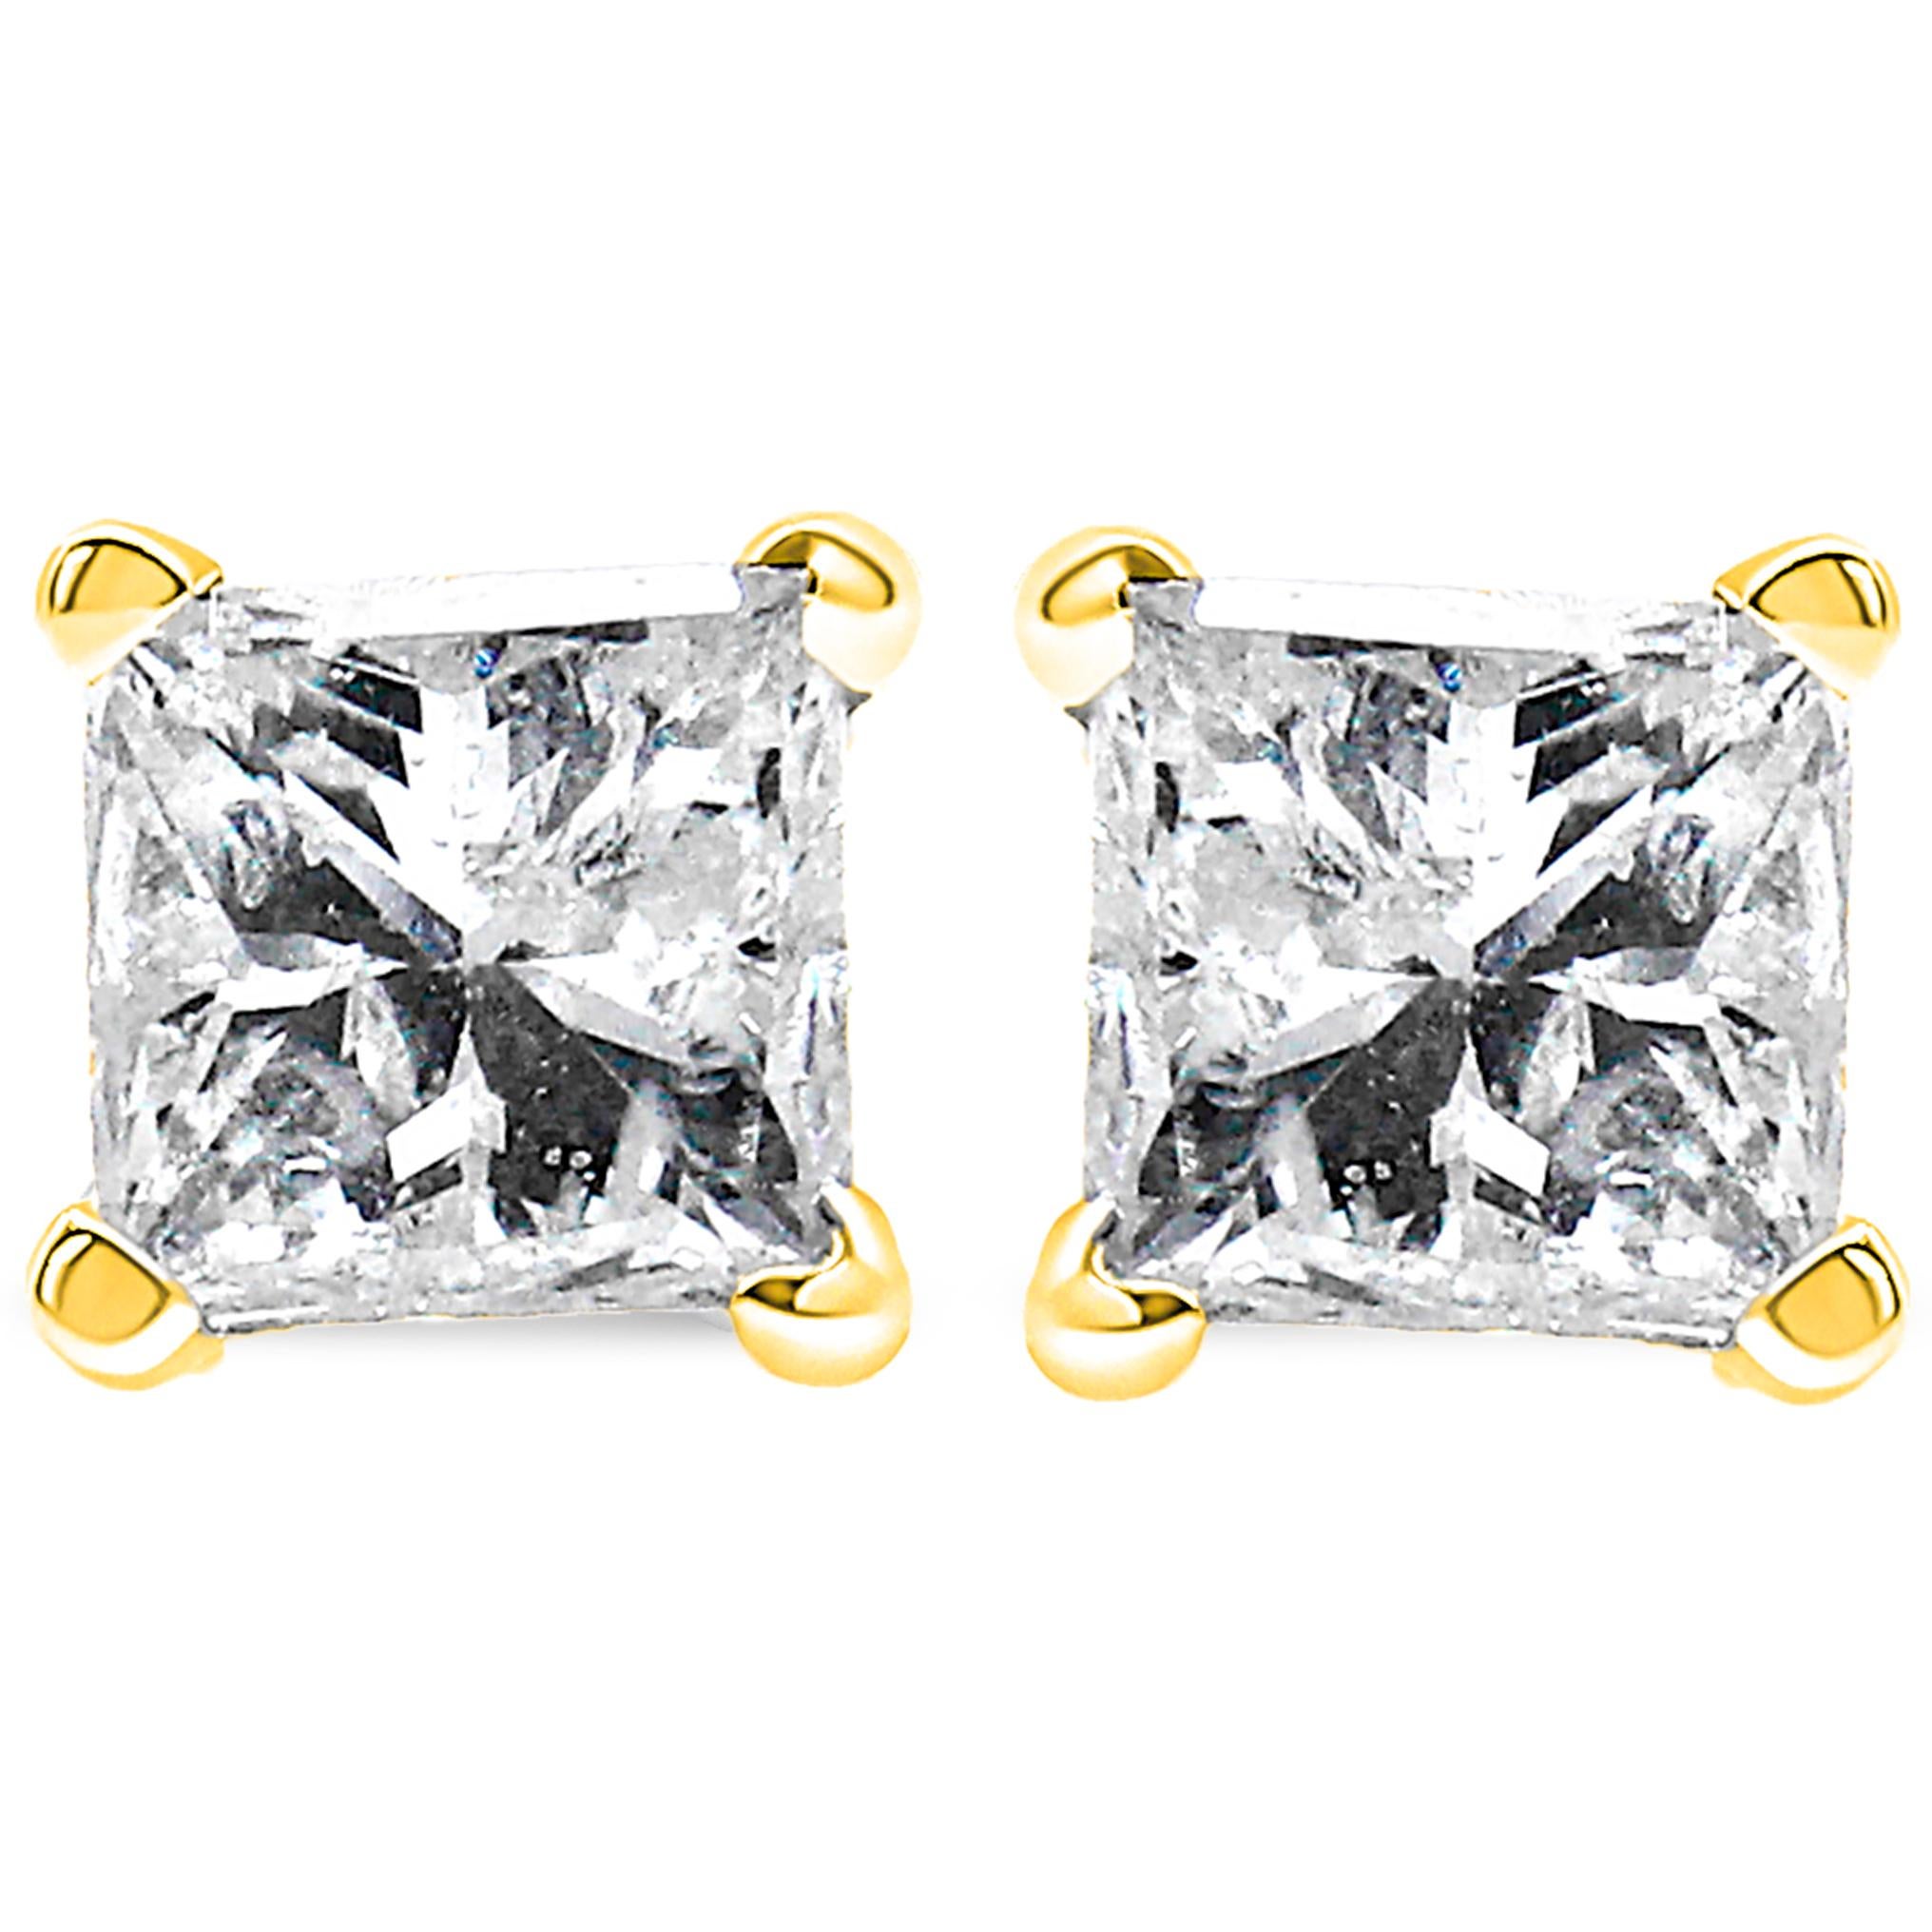 Frame her face with the bold and impressive look of these fabulous princess cut diamond stud earrings. Crafted in genuine 14 Karat gold, each earring features a mesmerizing princess cut square diamond solitaire in a timeless four-prong setting.